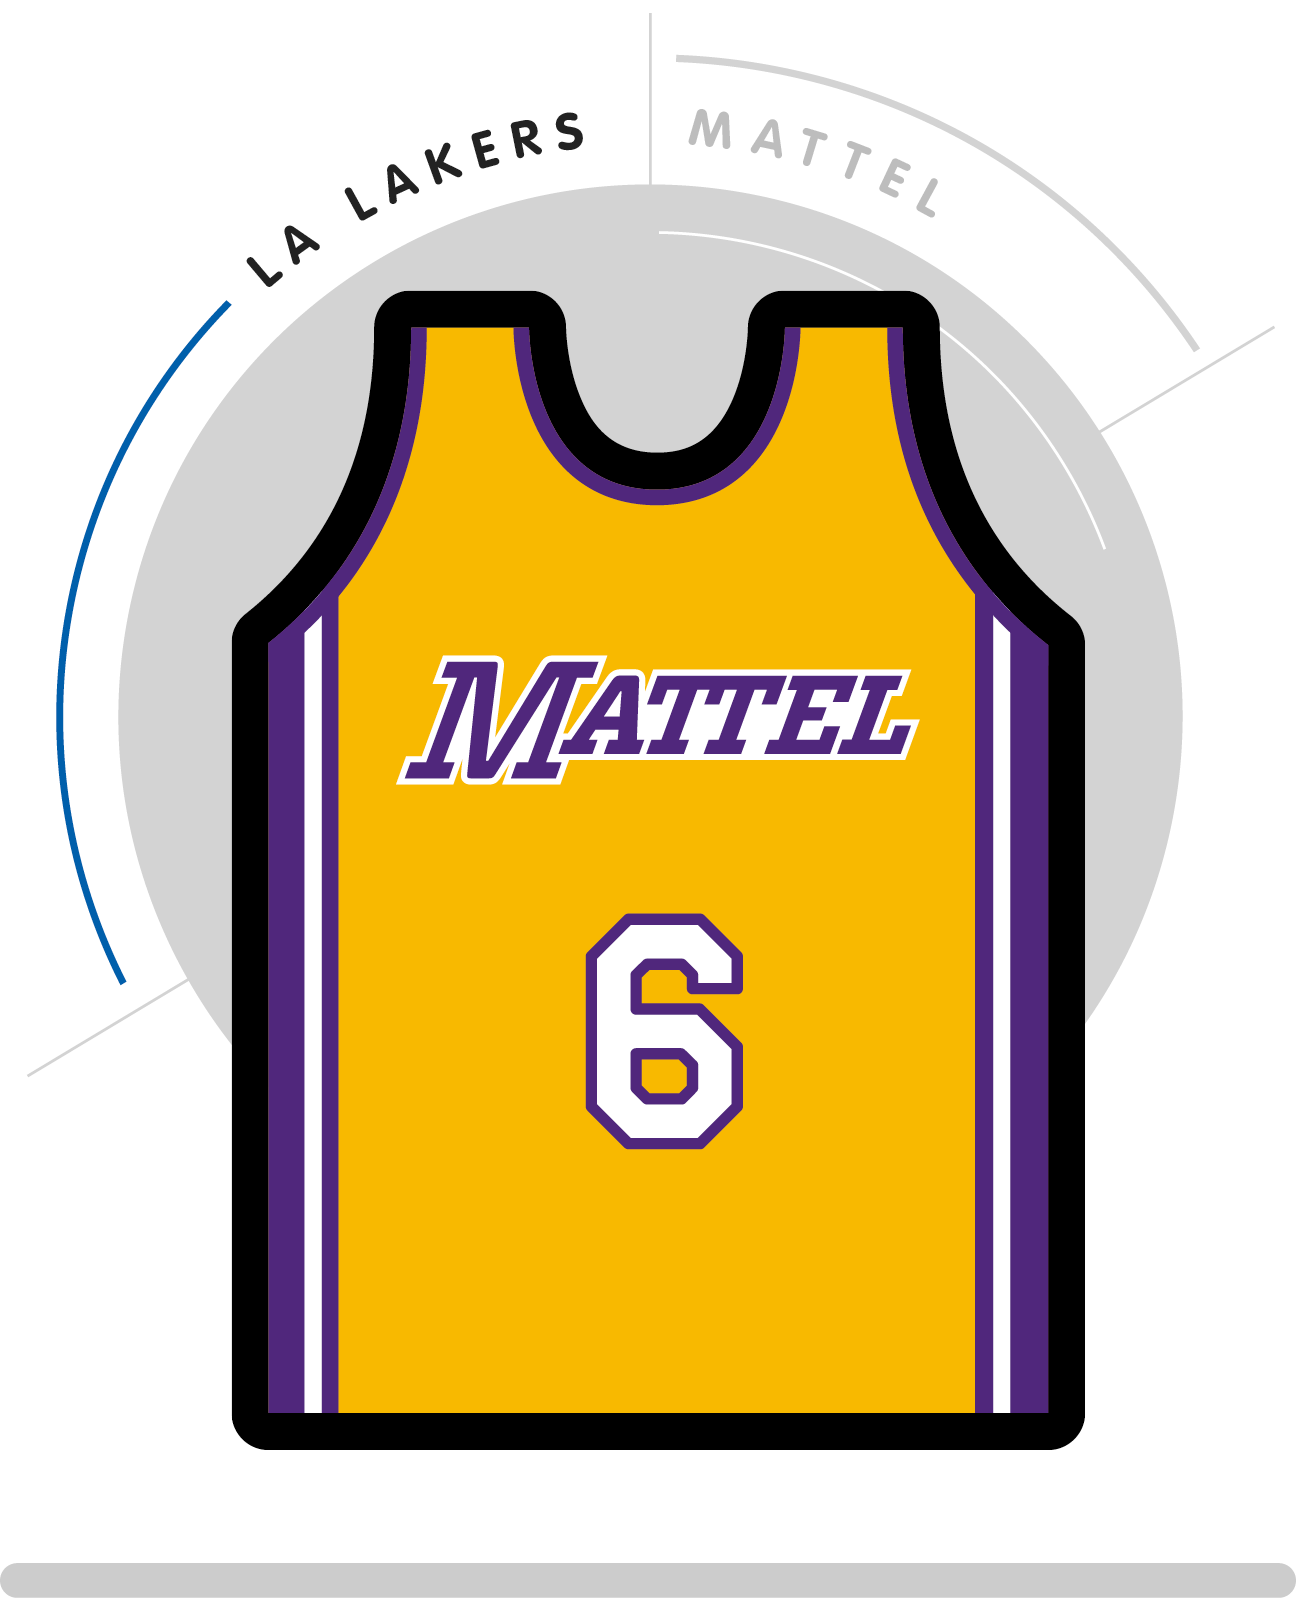 An in-depth look at NBA jerseys with full advertising1296 x 1600